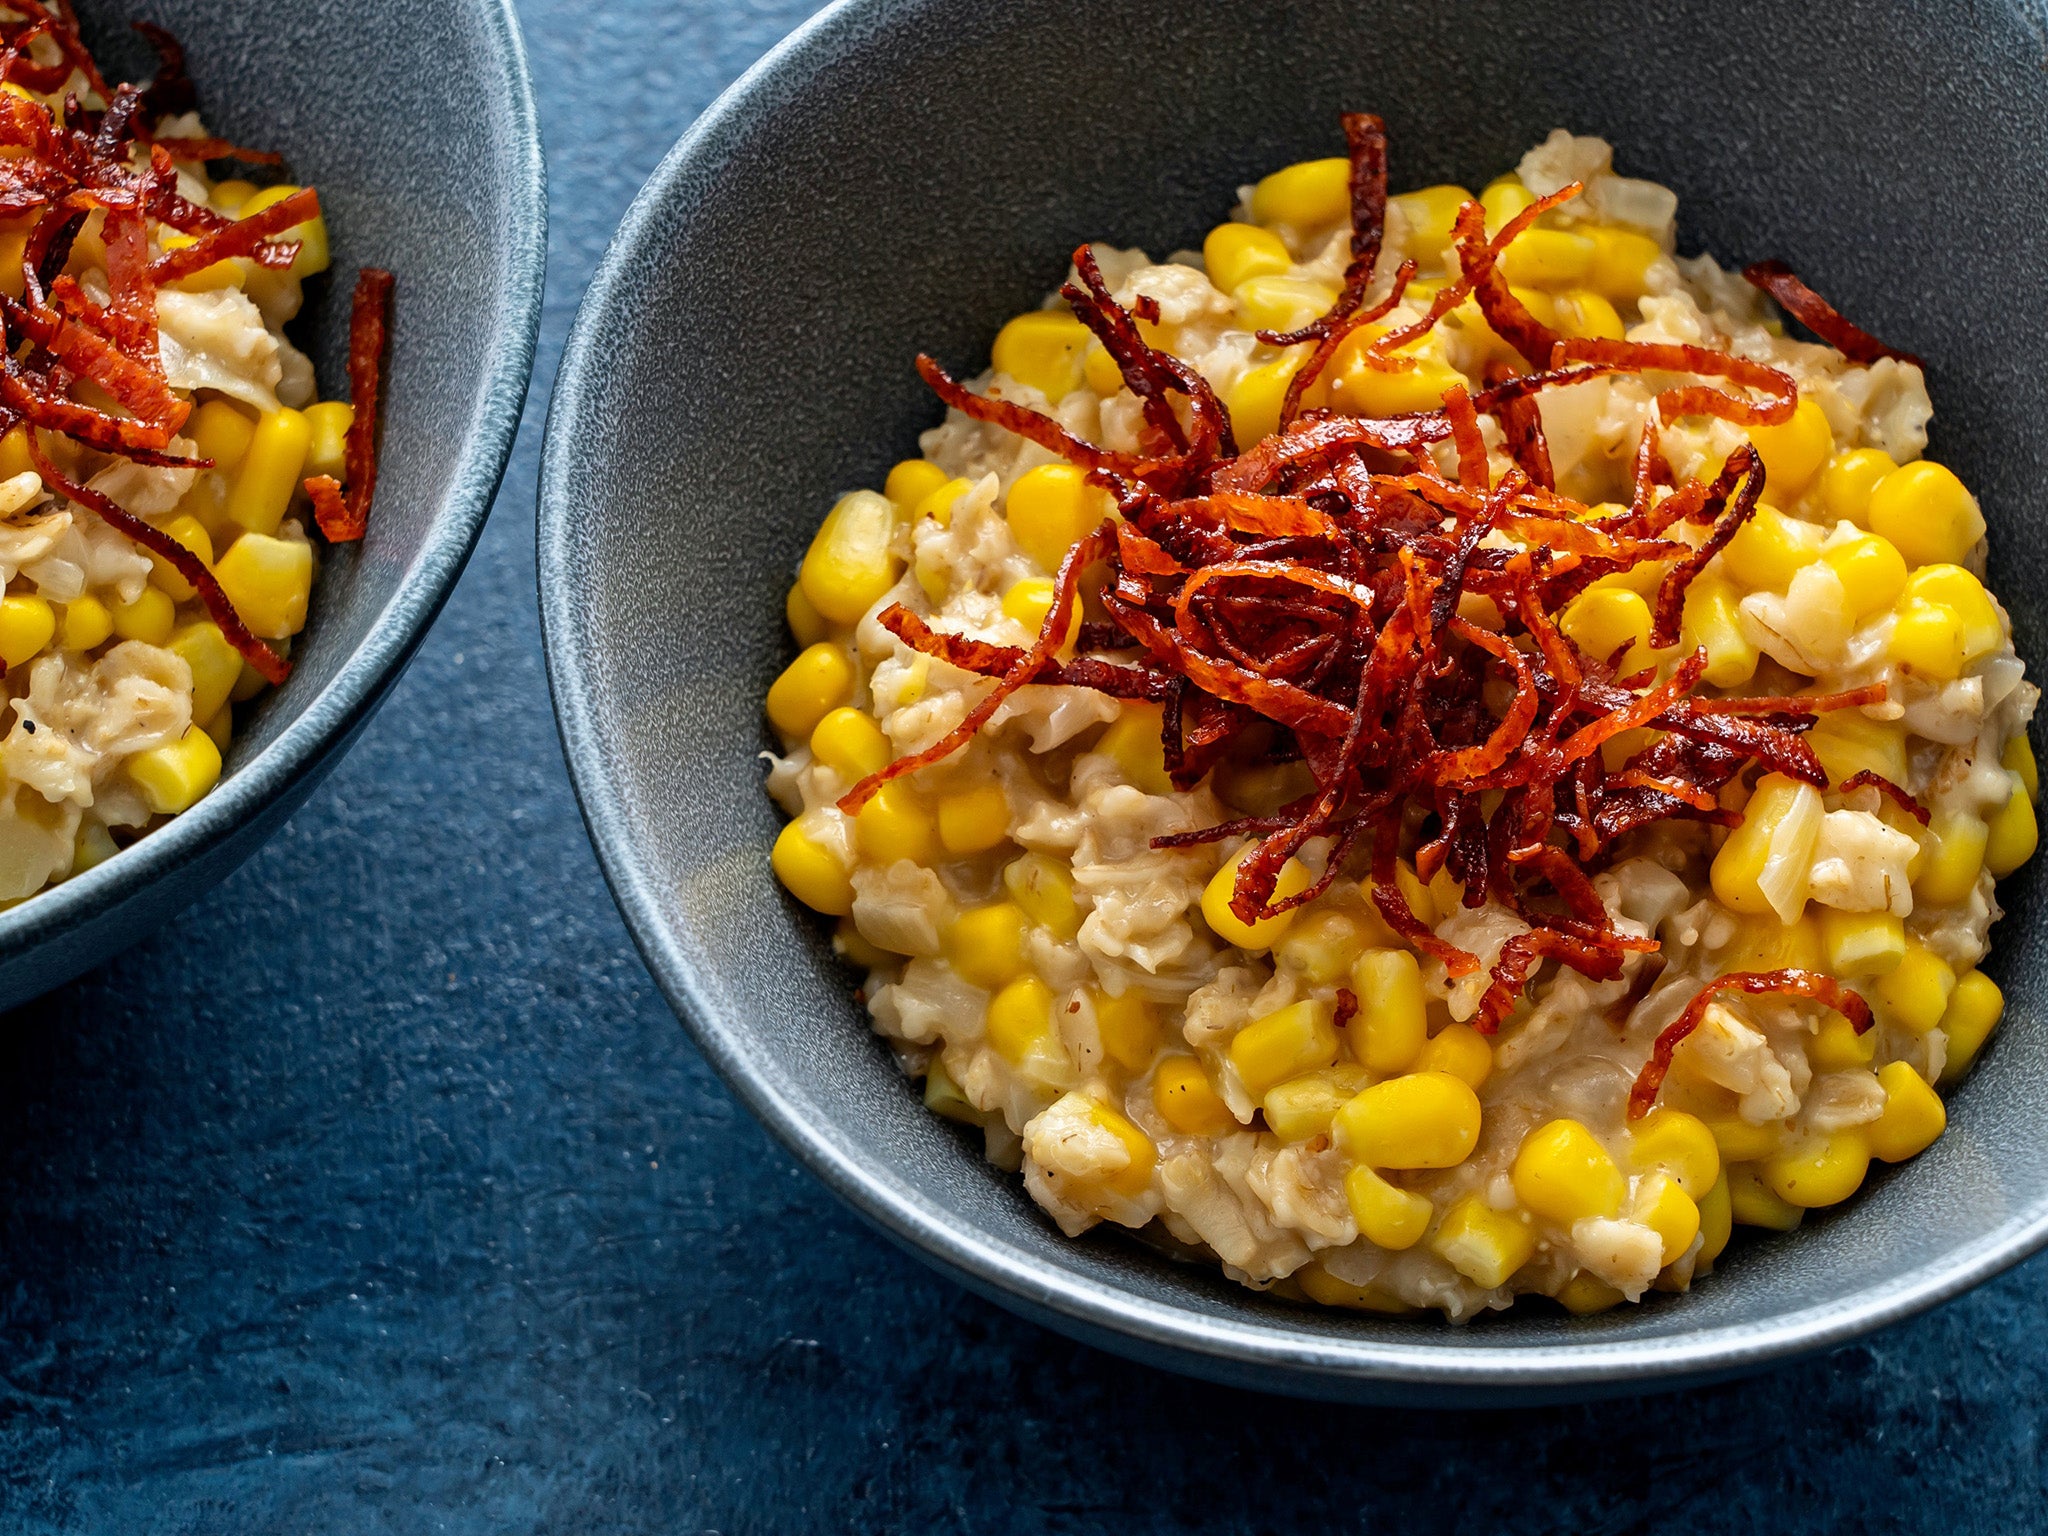 Like any other grain, oats can be used in savoury dishes, too